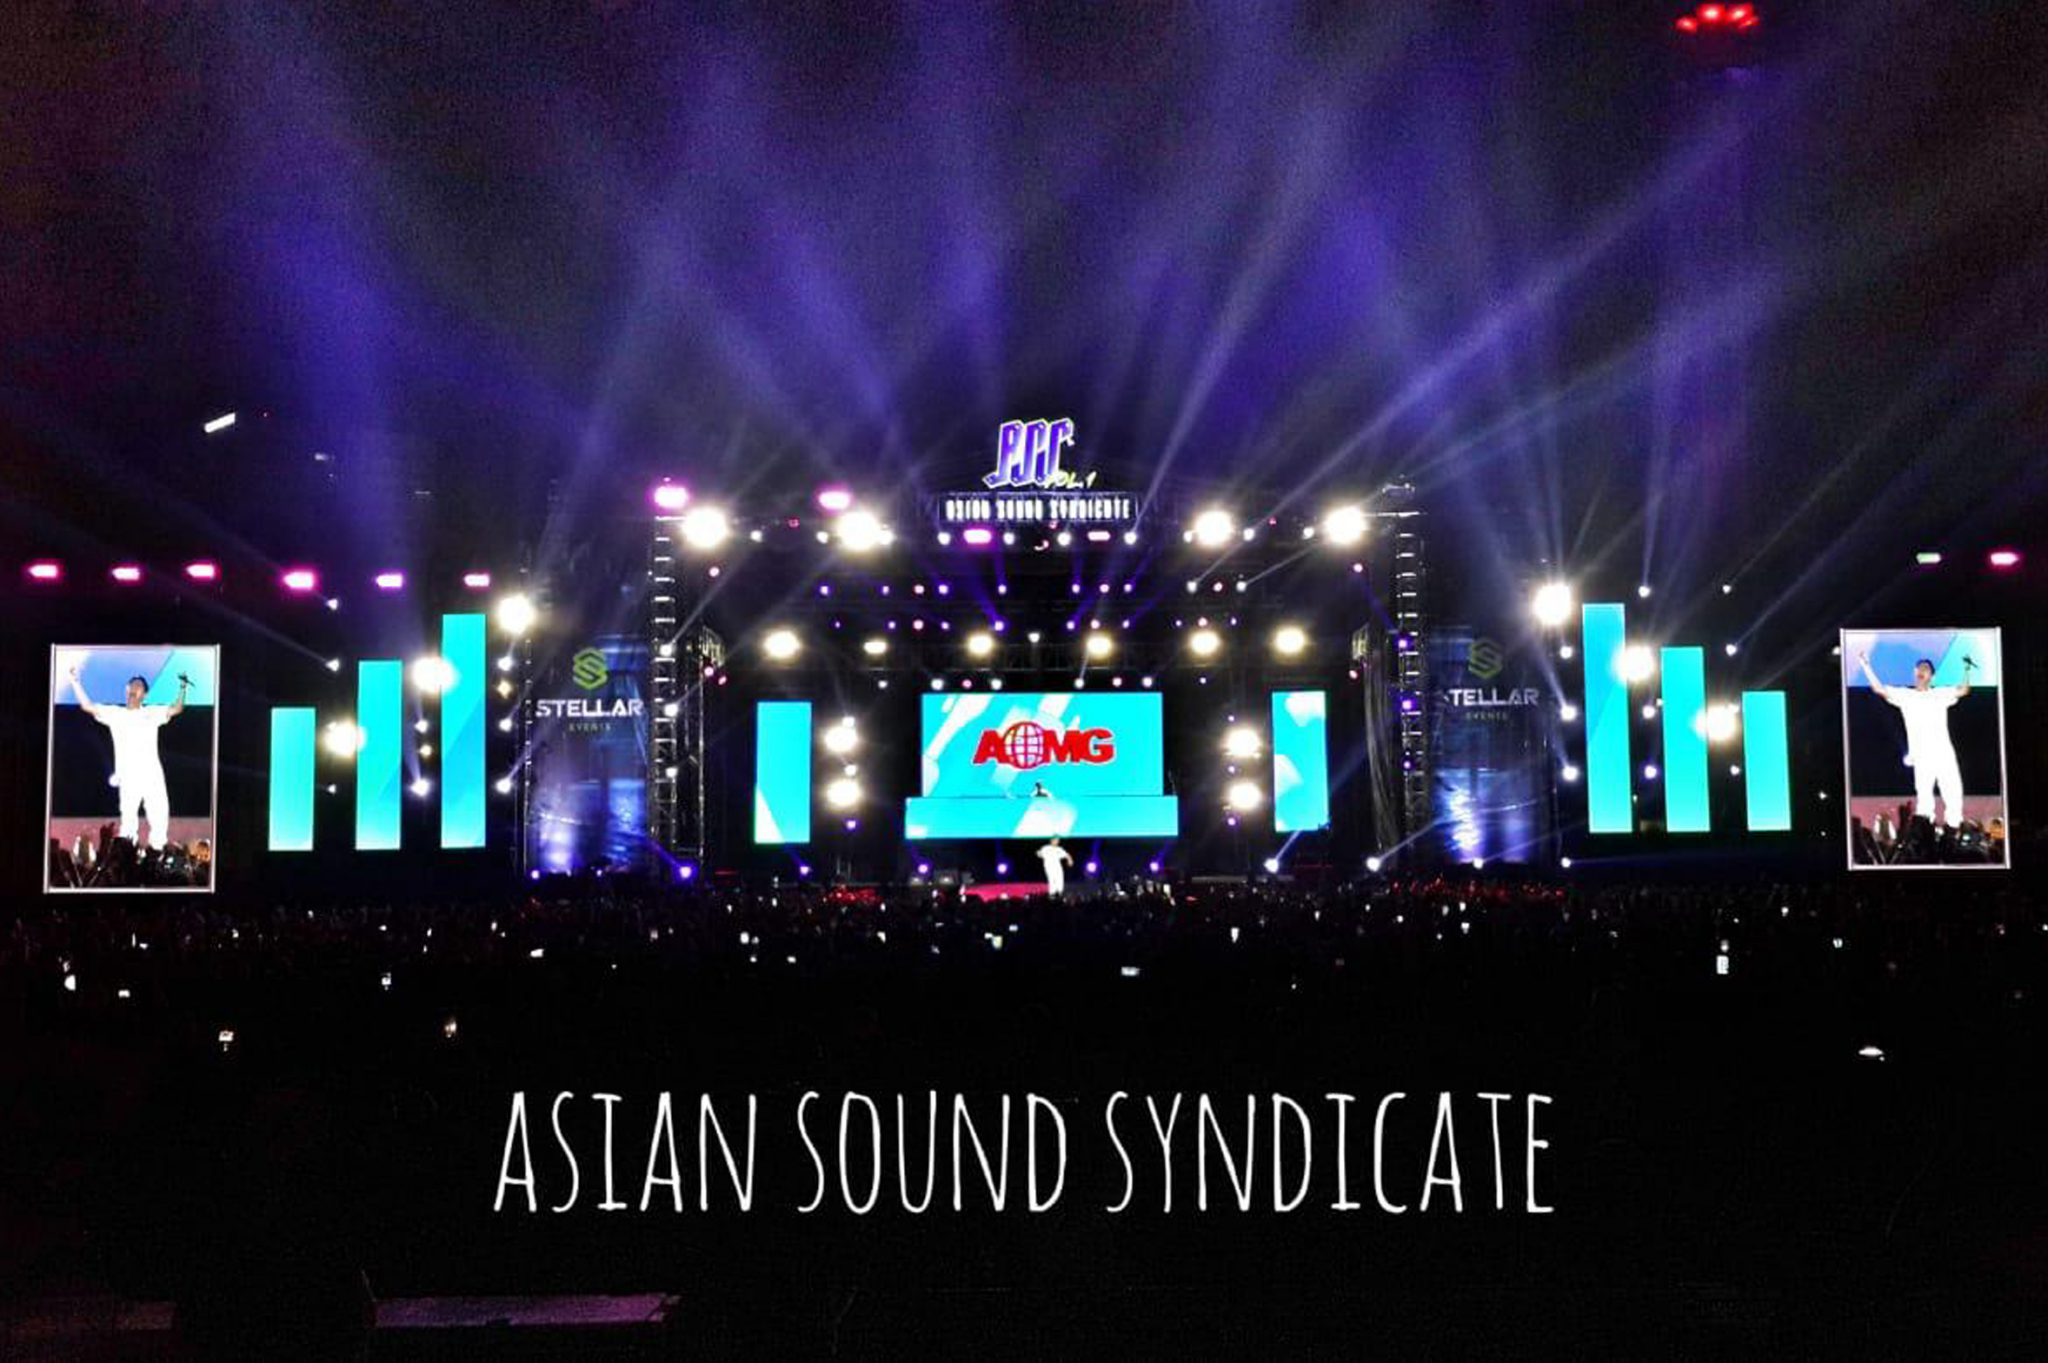 Asian Sound Syndicate